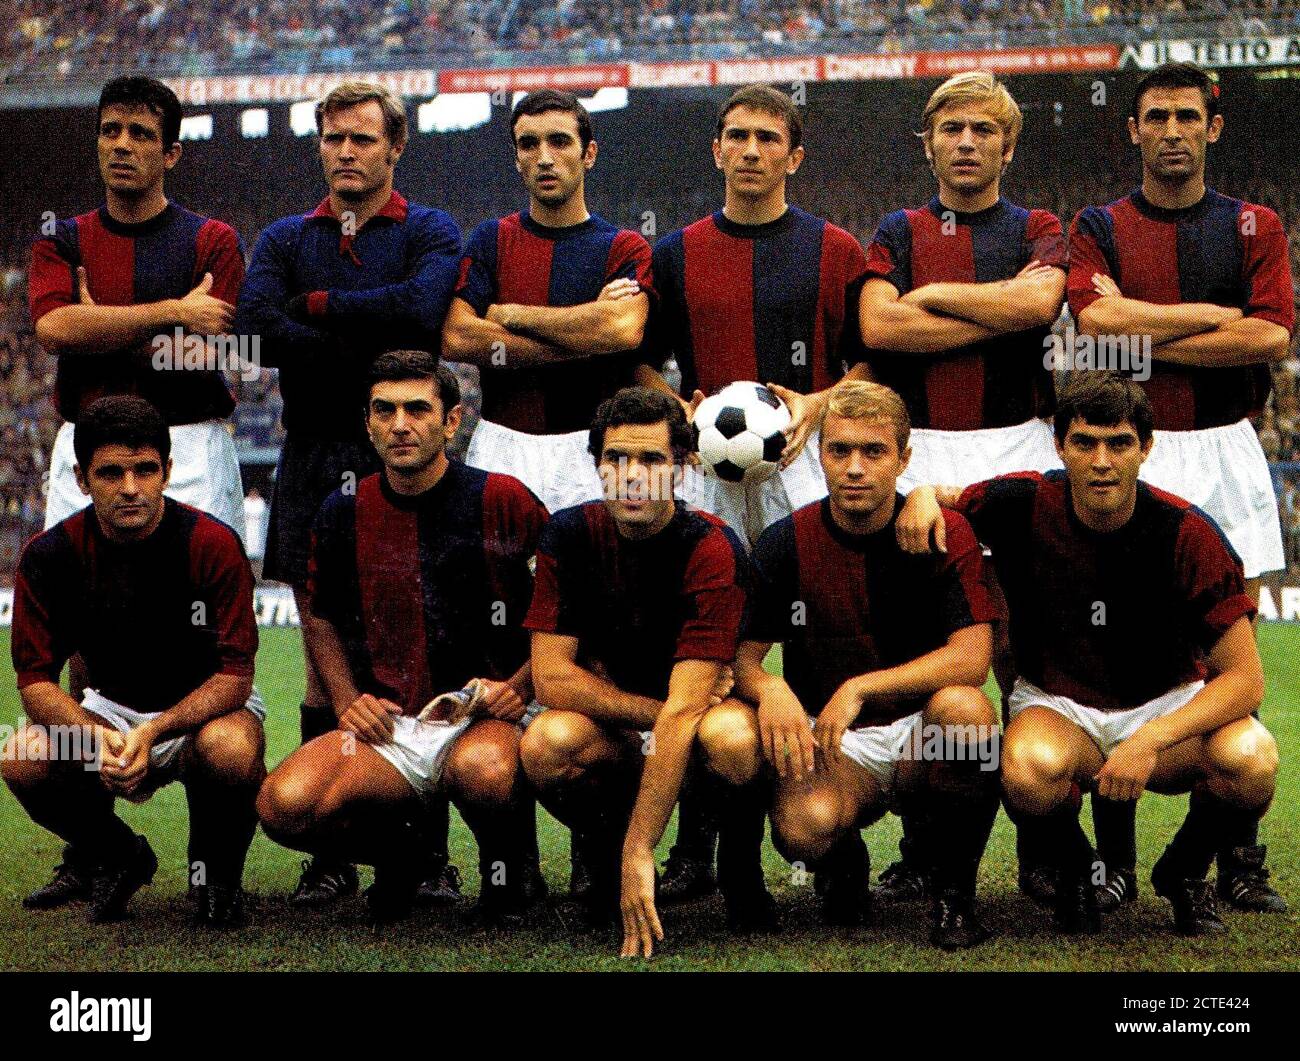 Milan, San Siro, September 14, 1969. A line-up of Bologna F.C. took to the field in the away defeat versus Inter Milan (0-1), Matchday 1 of the Italian Championship 1969–70 Serie A. From left to right, standing: F. Janich, G. Vavassori, F. Cresci, G. Savoldi, T. Roversi, M. Ardizzon; crouched: M. Perani, G. Bulgarelli (captain), L. Mujesan, I. Gregori, A. Scala. Stock Photo